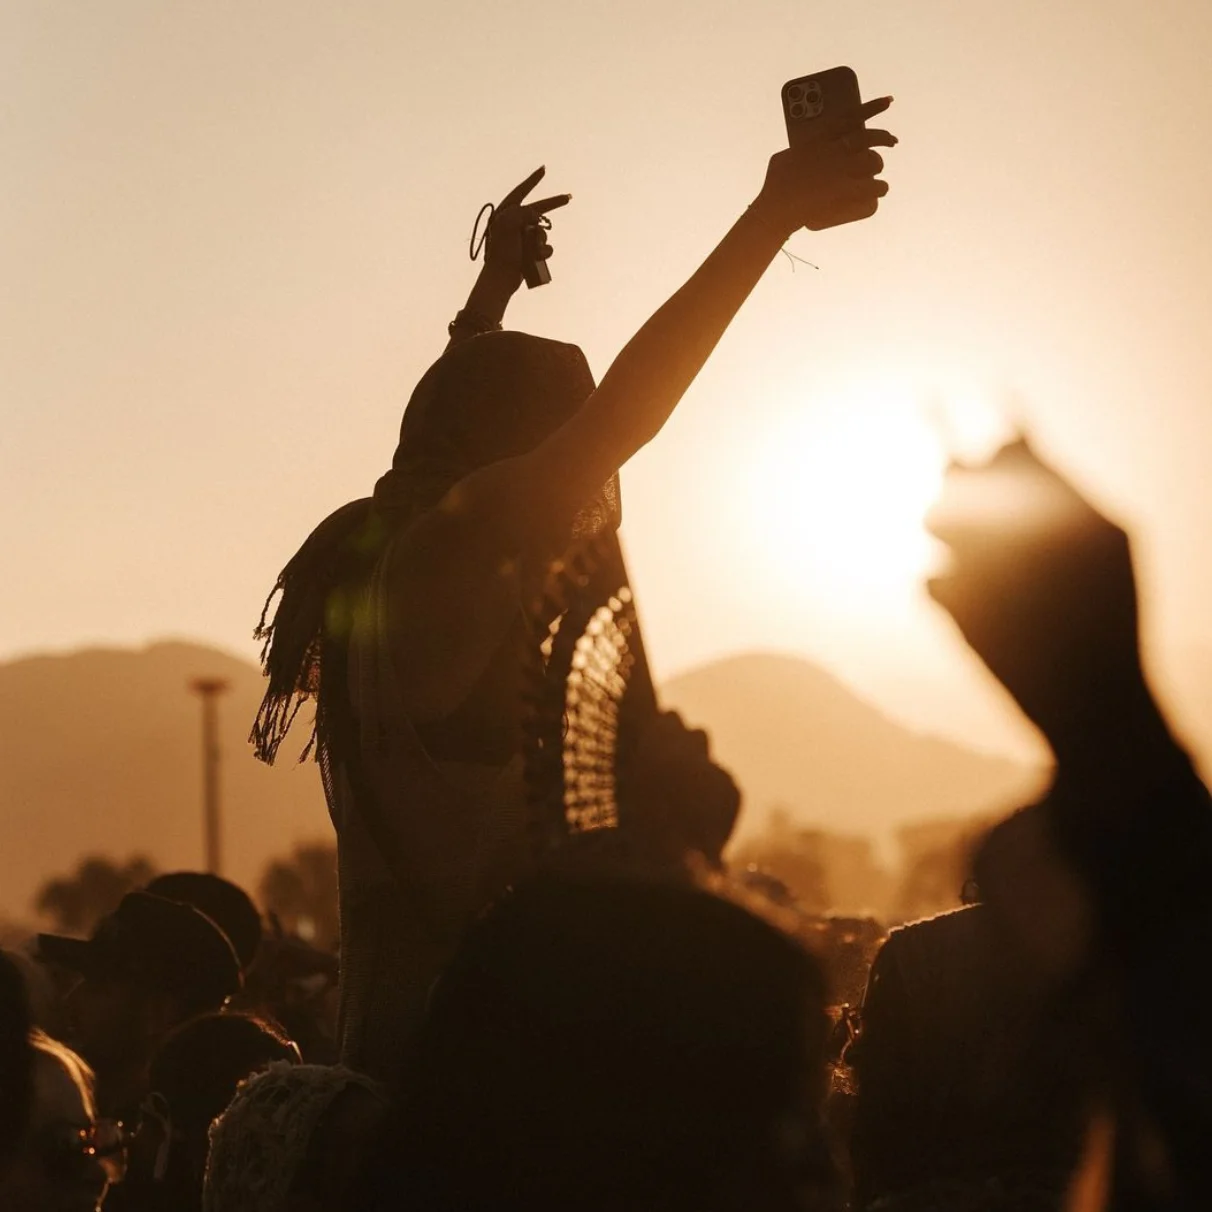 Festival Season Essentials: How to Pack Smart for Unforgettable Moments